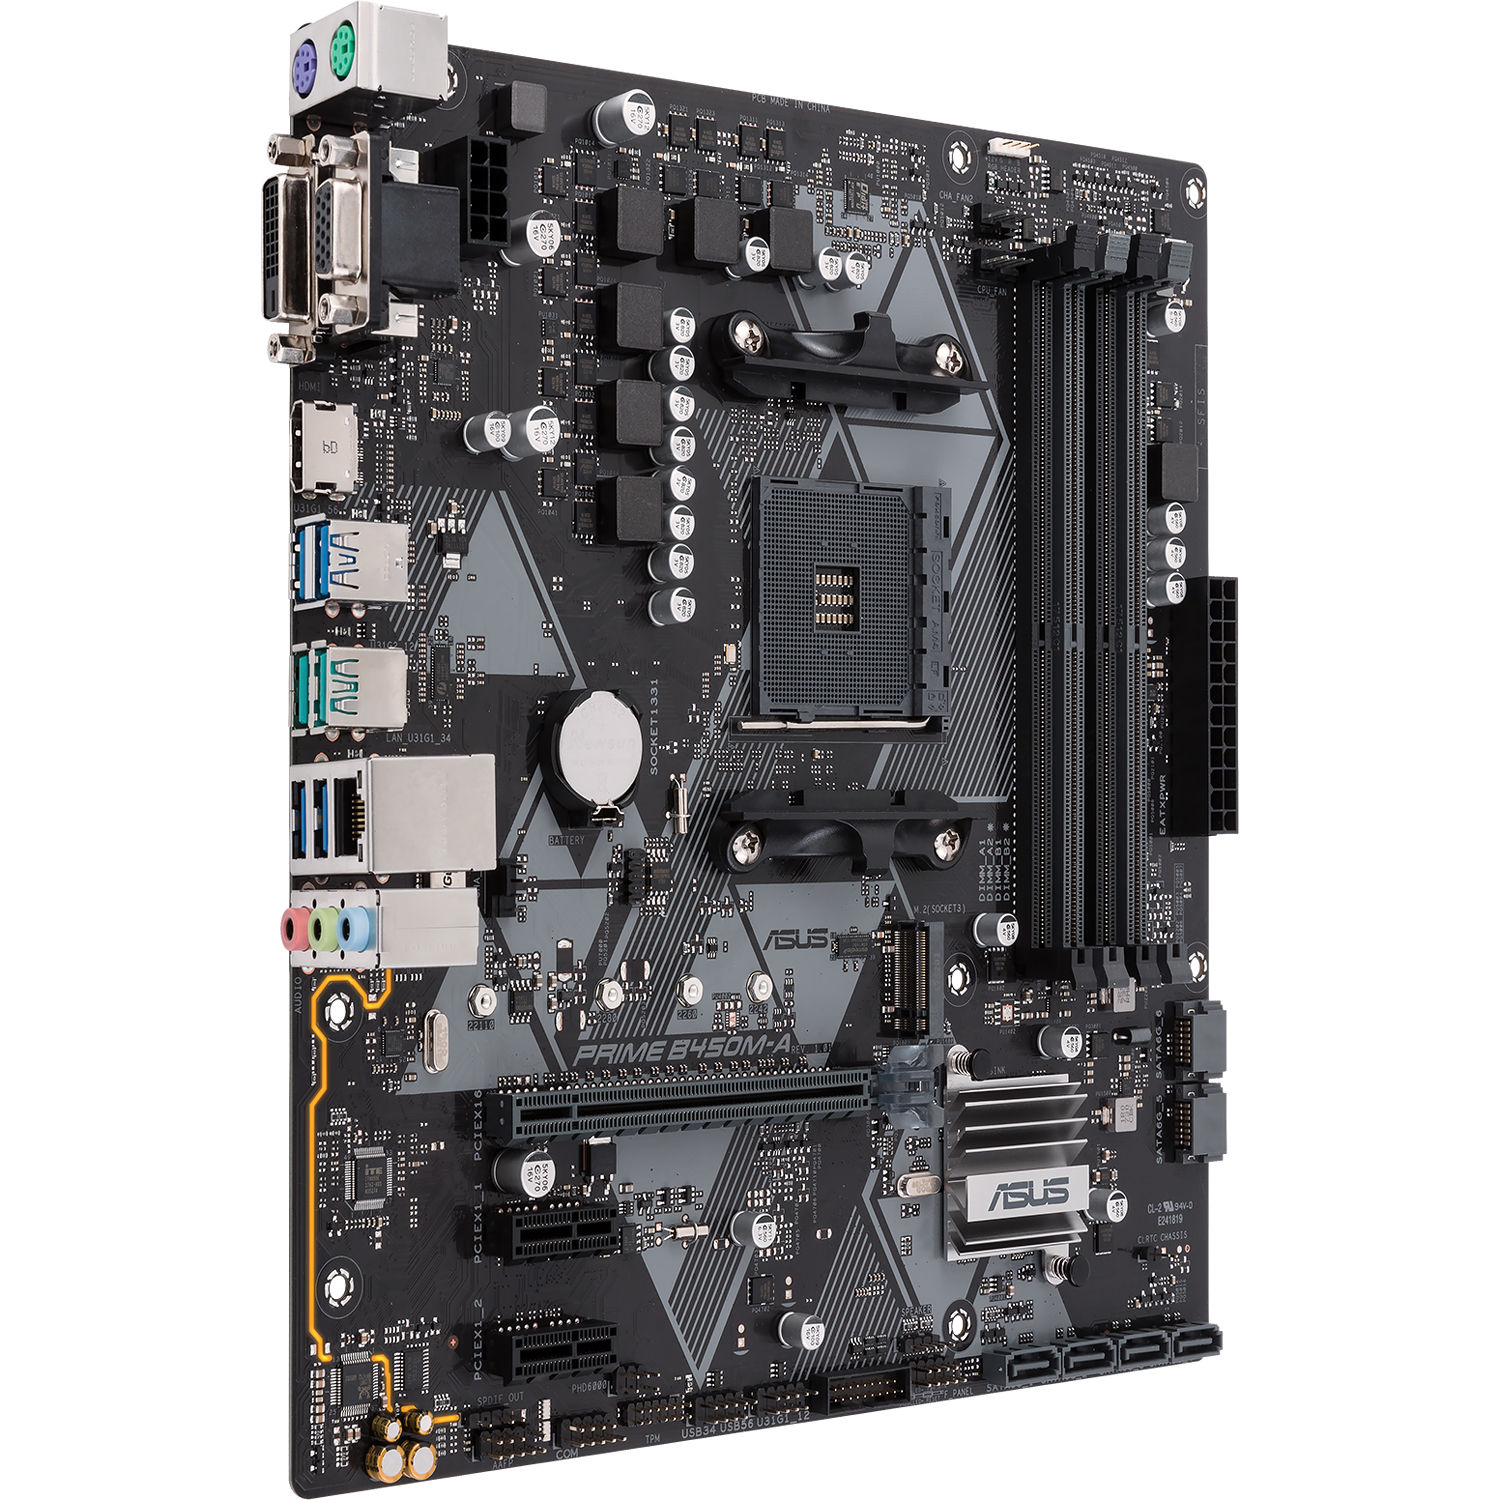 MB AMD ASUS PRIME B450M-A ll AM4 DDR4 AM4 AMD +AMD RYZEN 3 4300GE 4C/8T 3.5 UP TO 4.4GHZ 6MB CACHE REDEON VEGA6 GRAPHICS TRAY+ FAN ,Desktop Mainboard